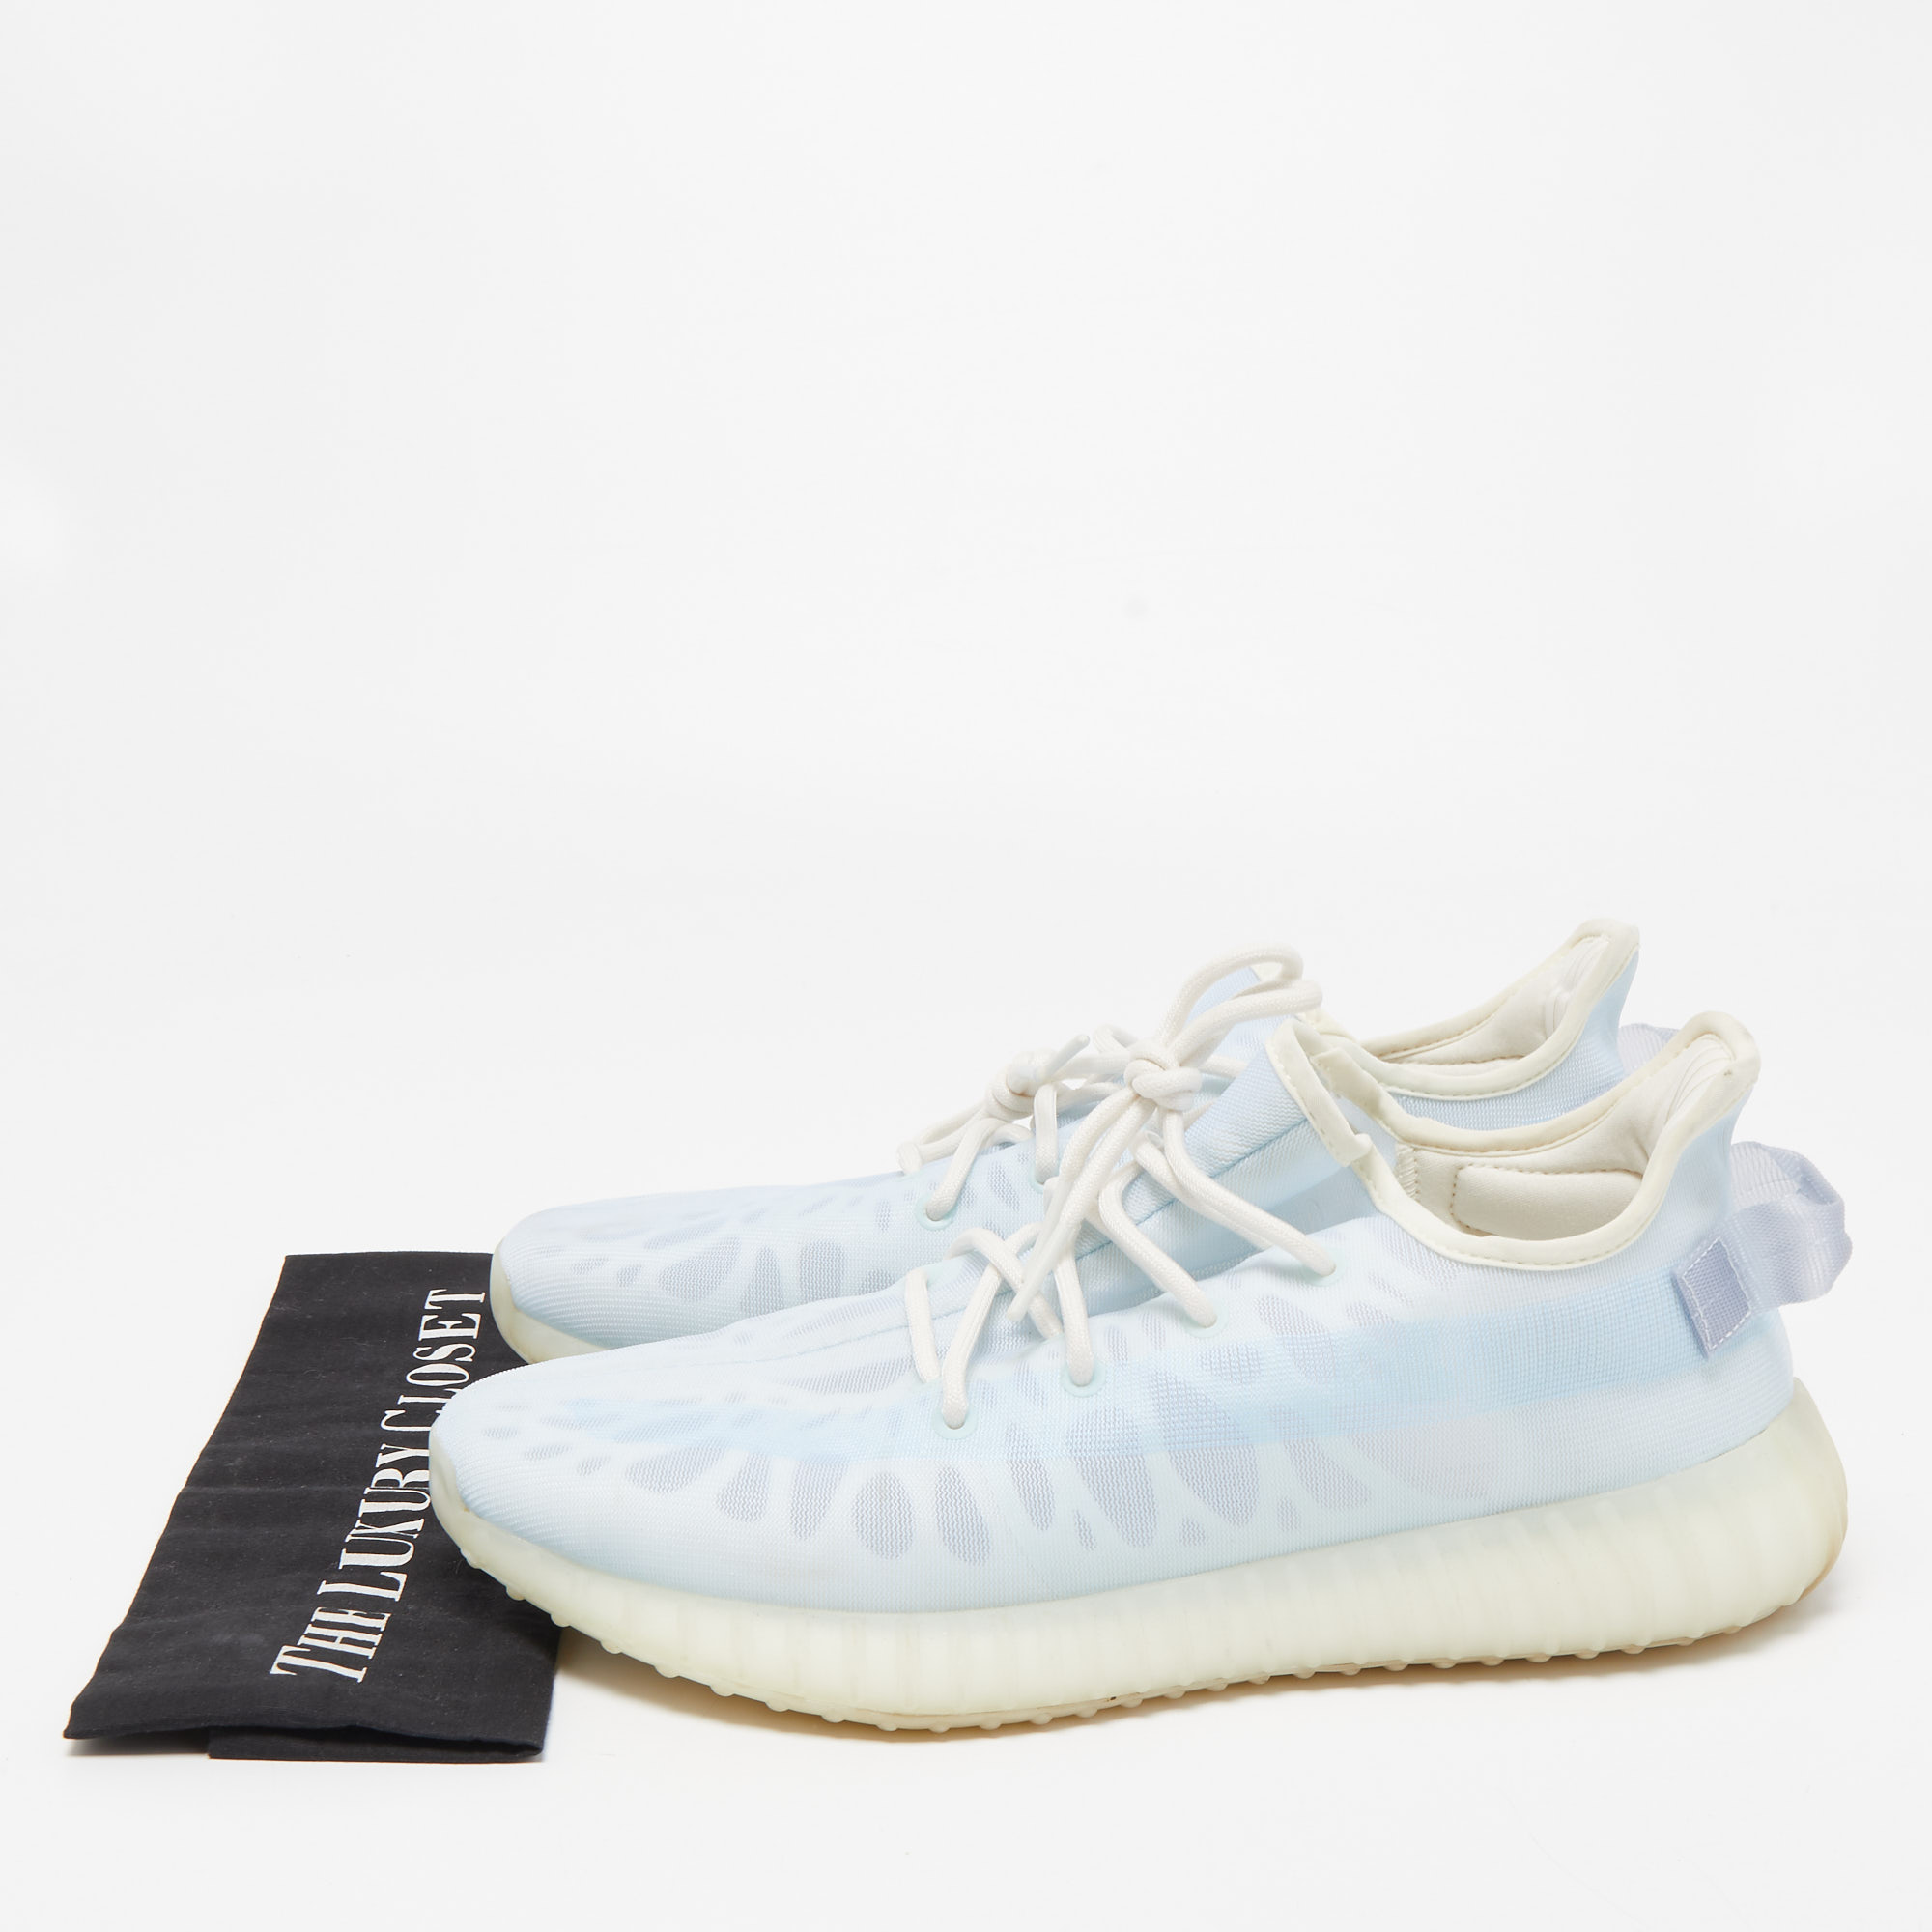 Yeezy X Adidas Light Blue Mesh Boost 350 V2 Mono Ice Sneakers Size 46 2/3